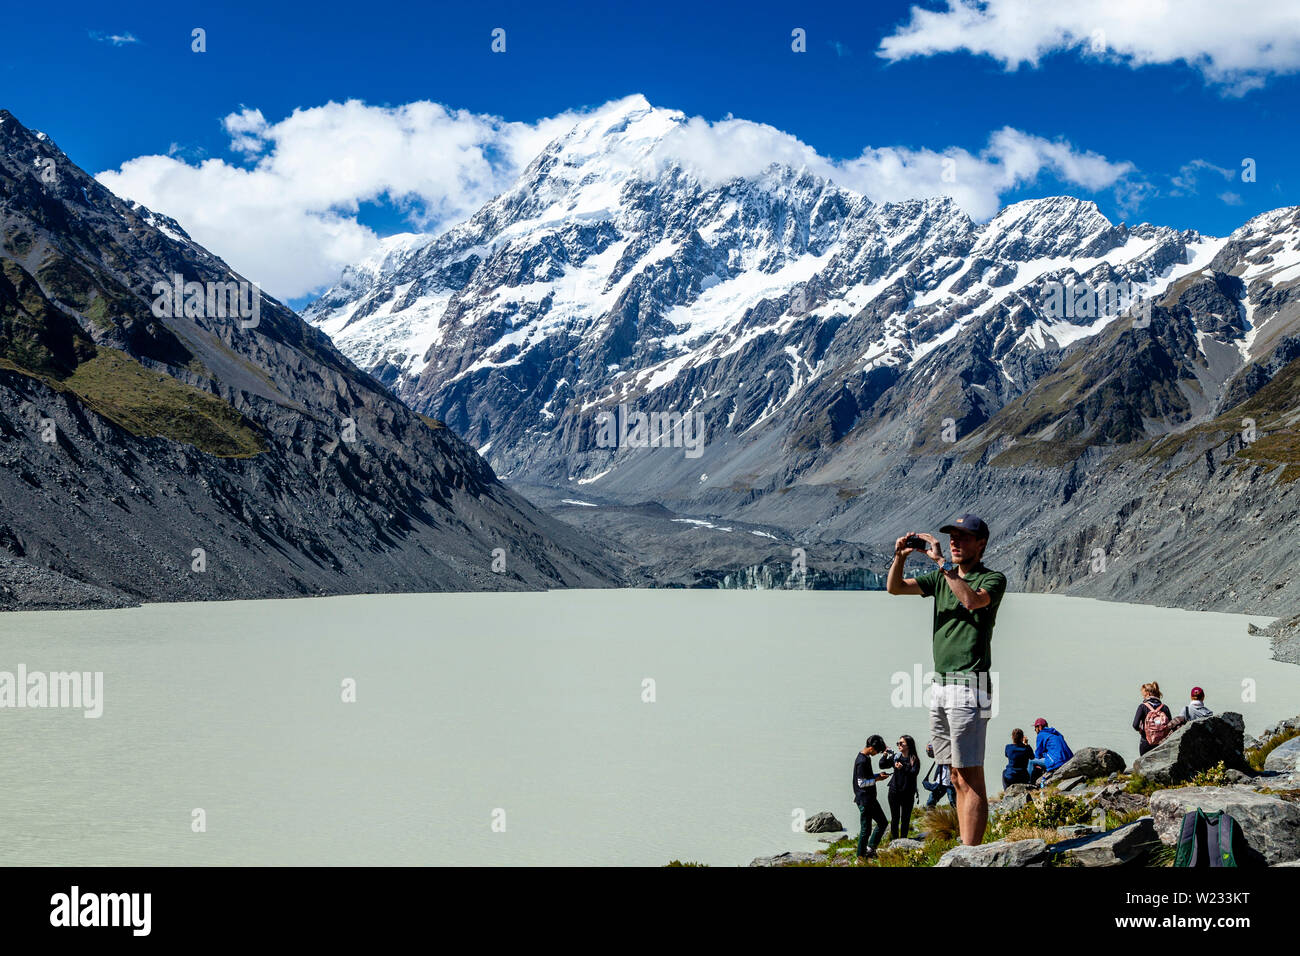 Walkers At The Hooker Lake Viewpoint At The End Of The Hooker Valley Track, Aoraki/Mt Cook National Park, South Island, New Zealand Stock Photo